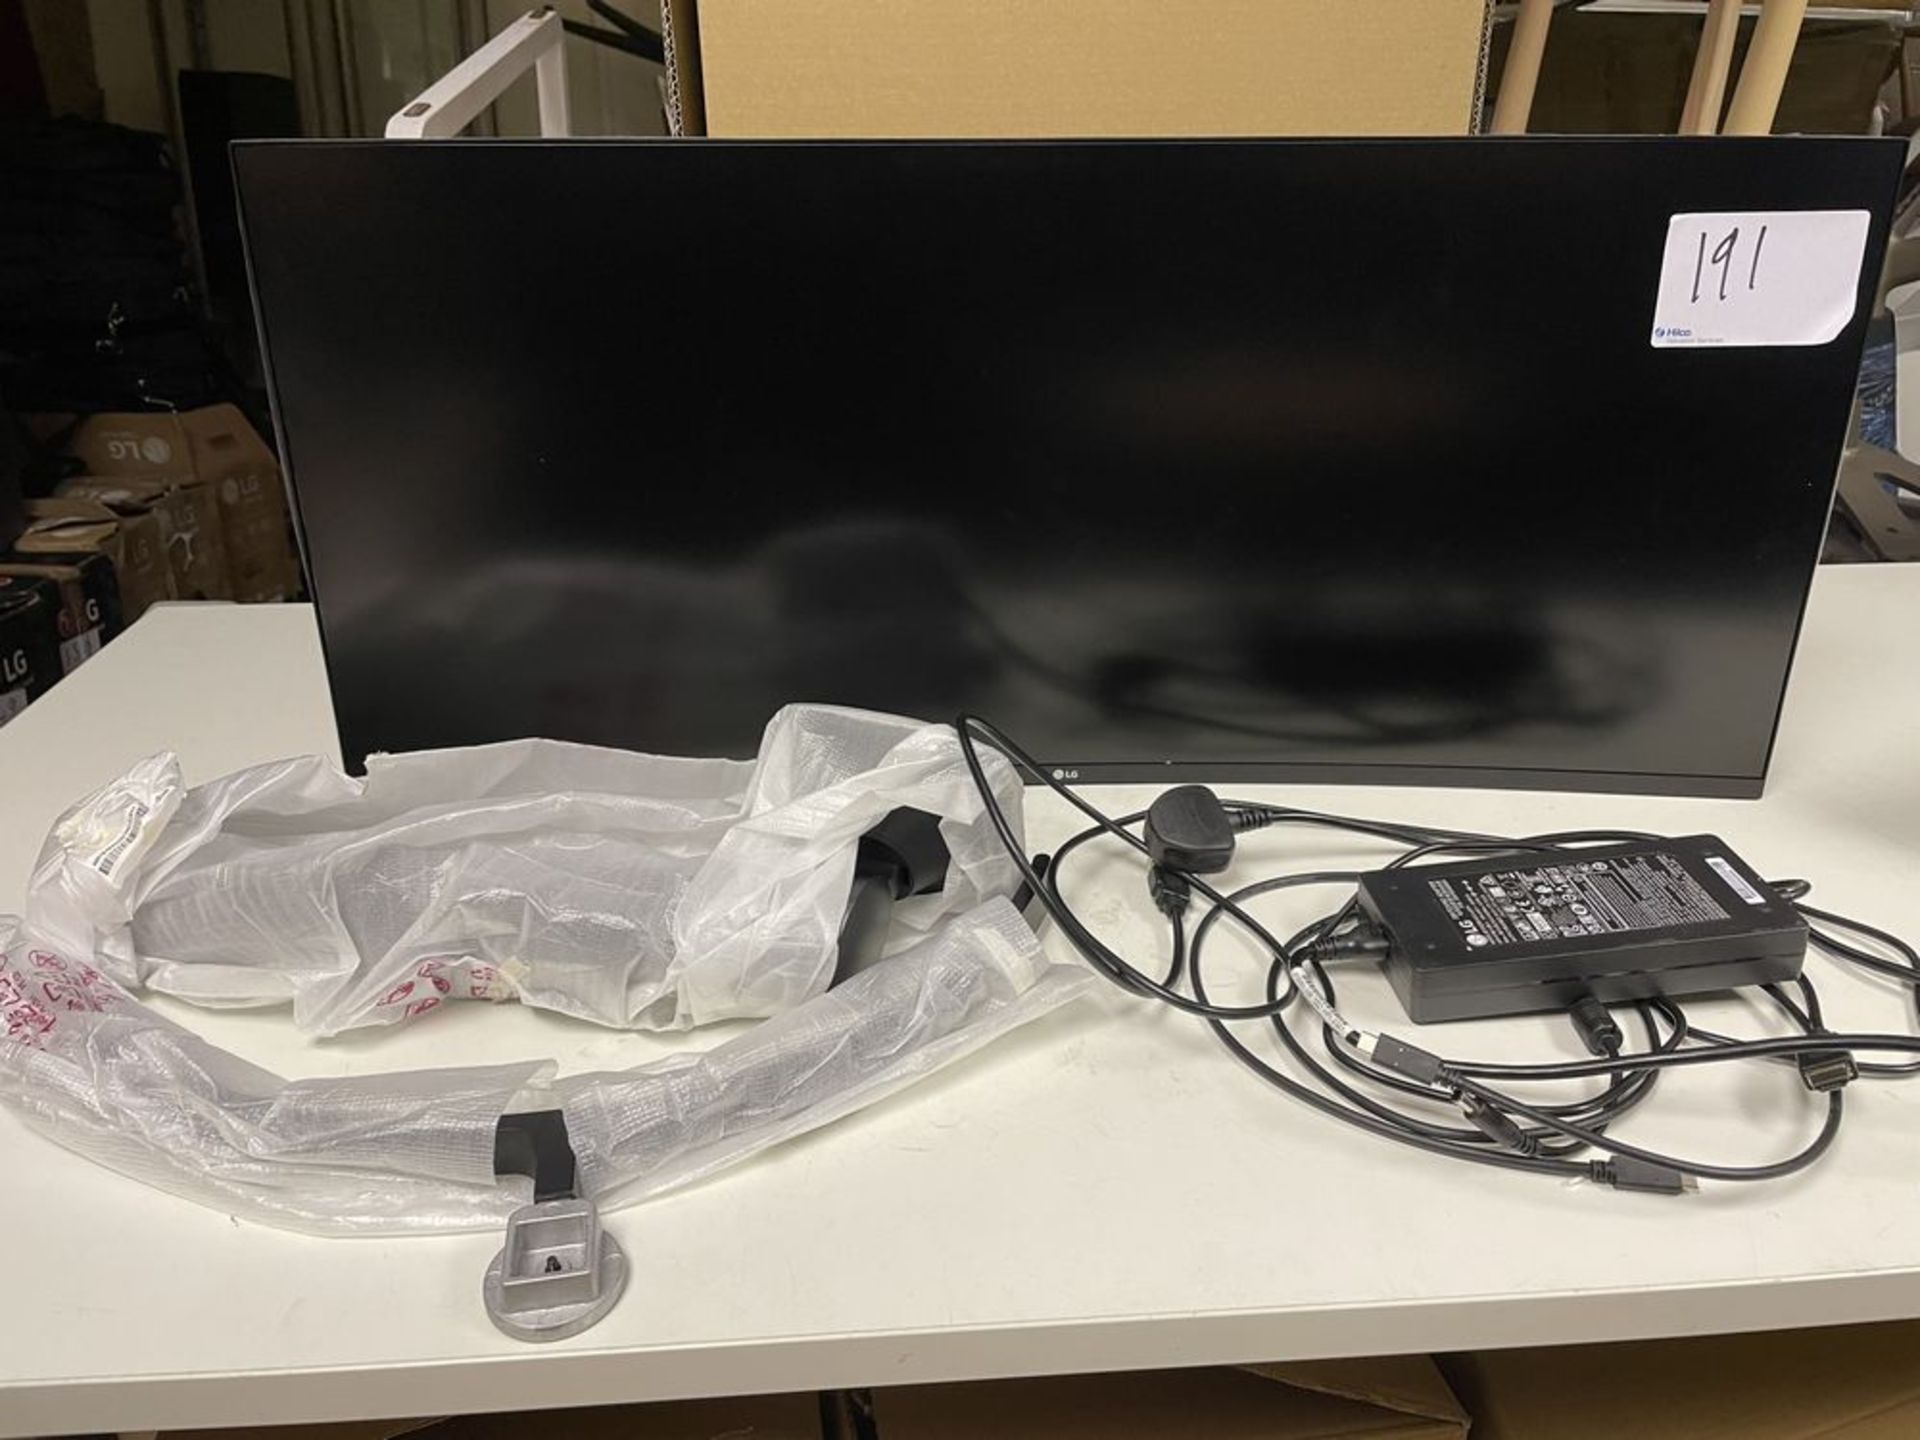 LG E37335 WN E372 75C-B moinitor curved screen With stand and plugs, comes in box.Serial No. 201NTY